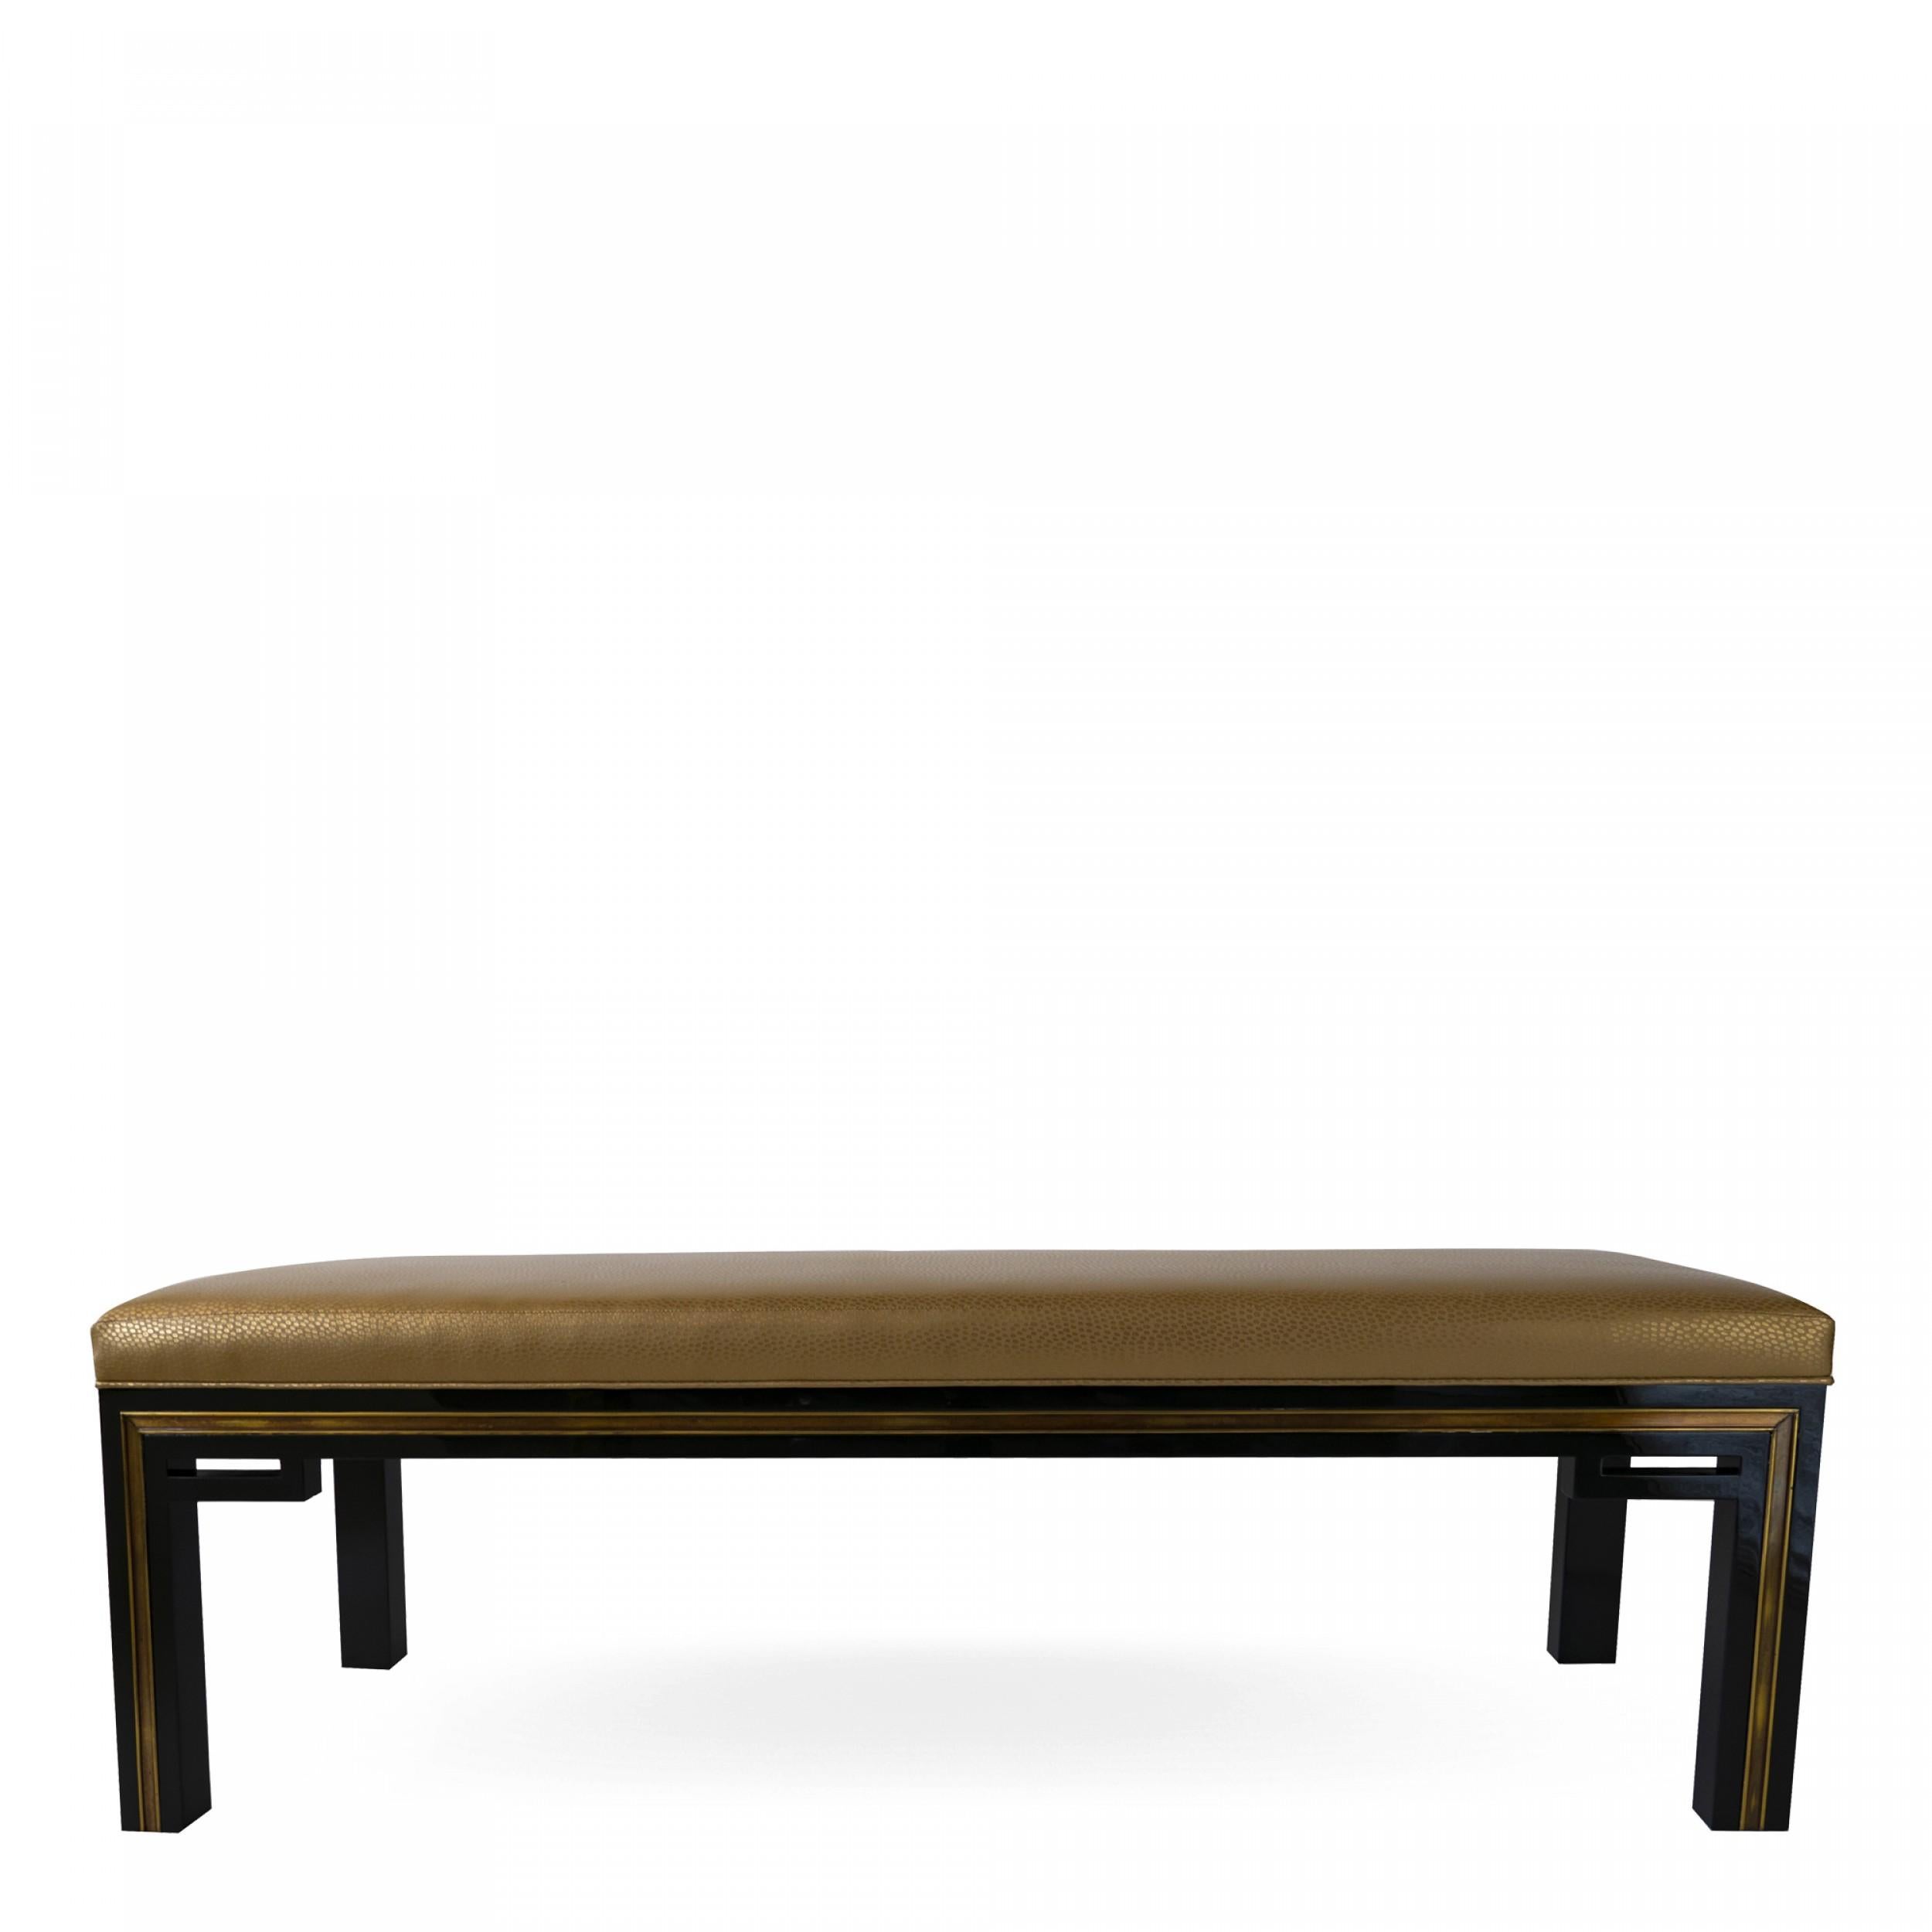 French Modern Black Lacquer Bench, Jacques Quinet.